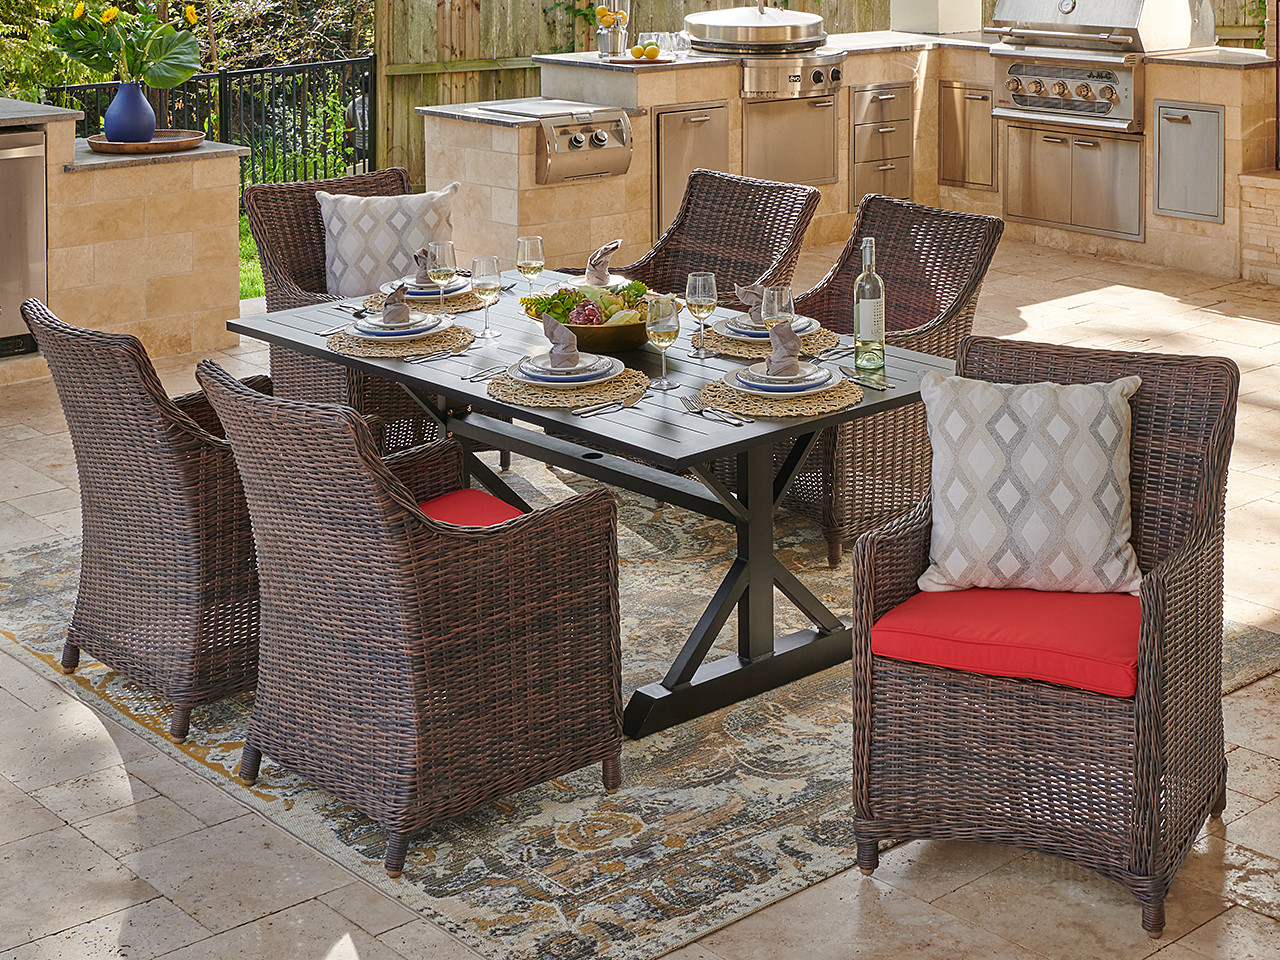 Valencia Sangria Outdoor Wicker and Jockey Red Cushion 7 Pc. Dining Set with 72 x 39 in. Table